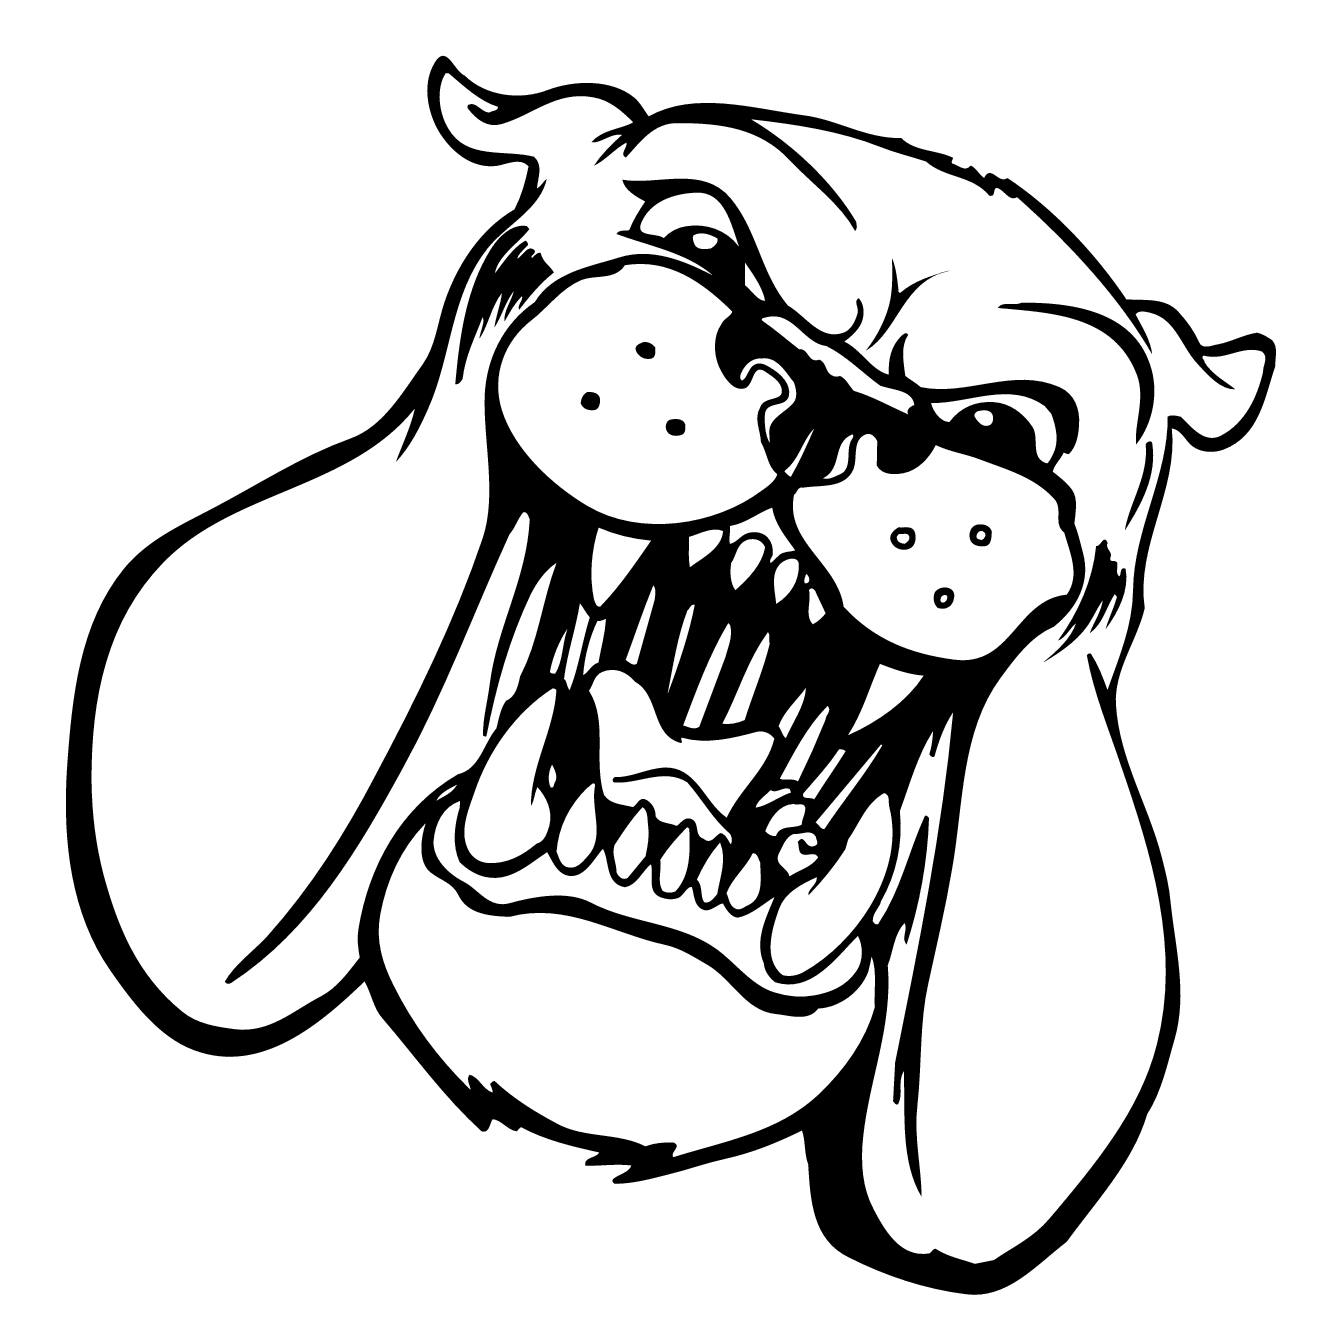 Free Bulldog Clipart Pictures | Clipart Panda - Free Clipart Images